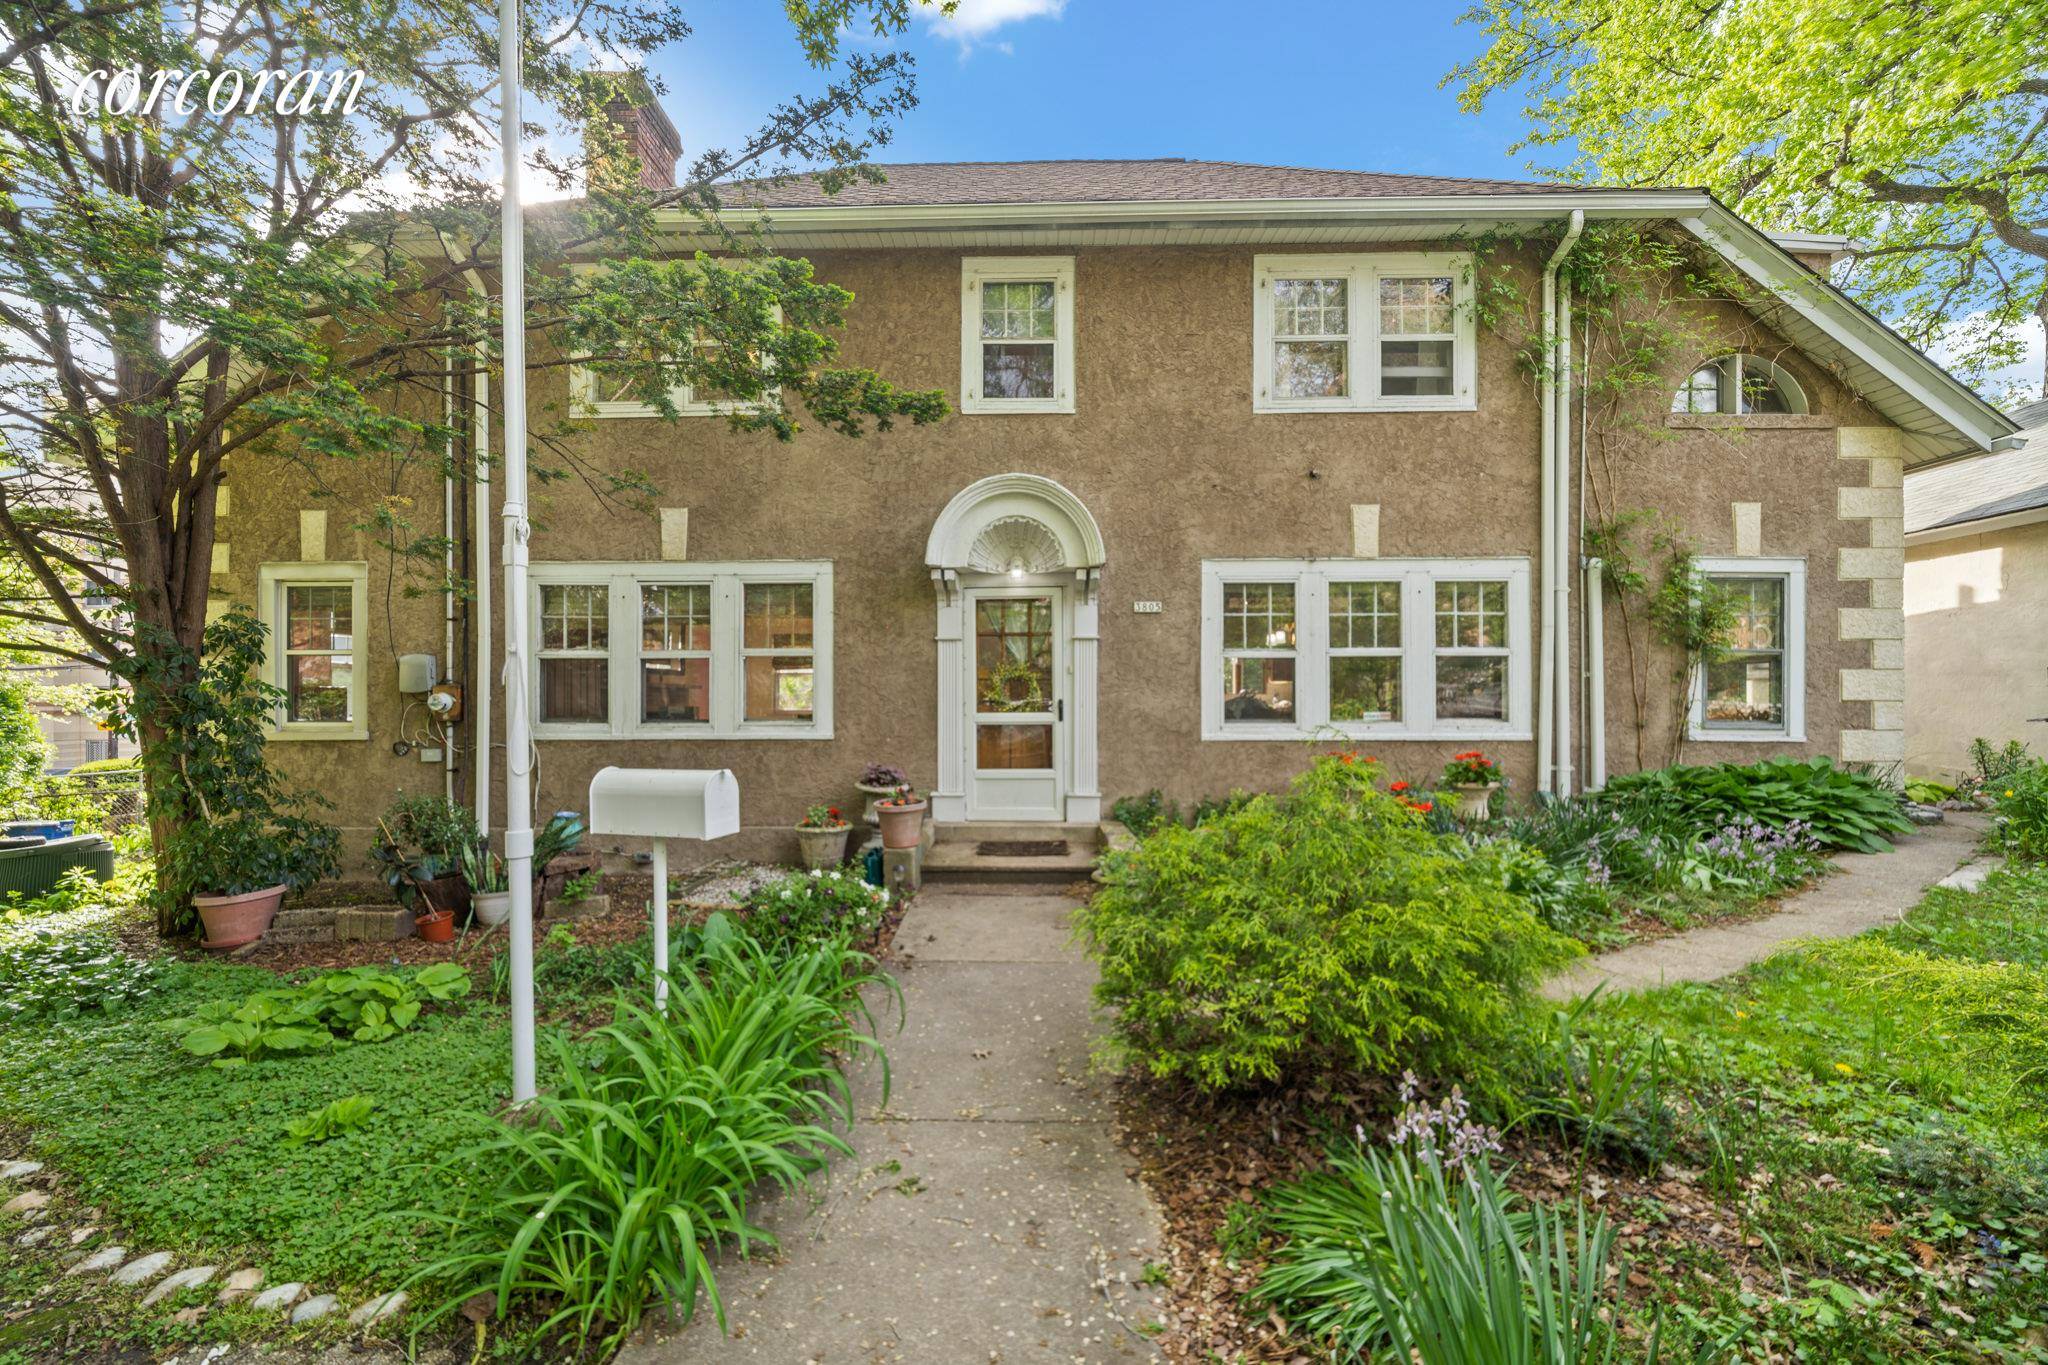 For the first time in over 30 years a Kingsbridge Heights gem is now available.